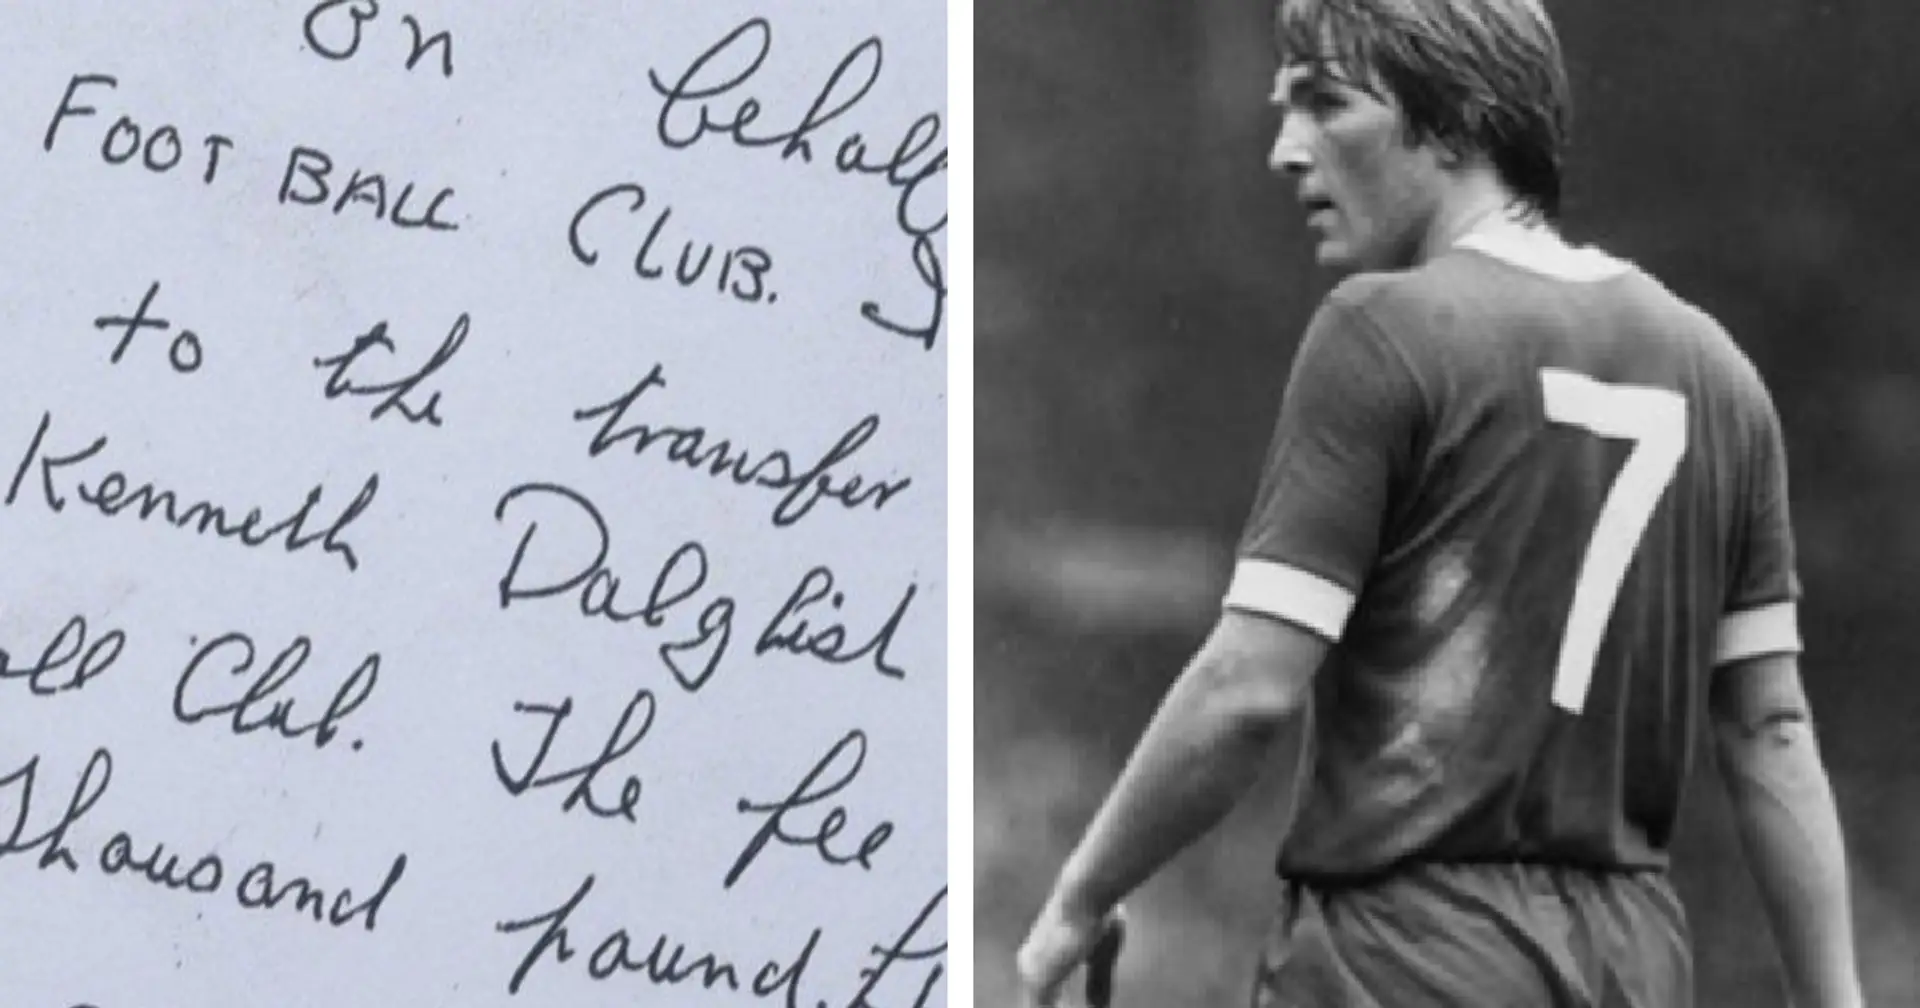 Piece of history: A look at original agreement of Sir Kenny Dalglish's signing for Liverpool